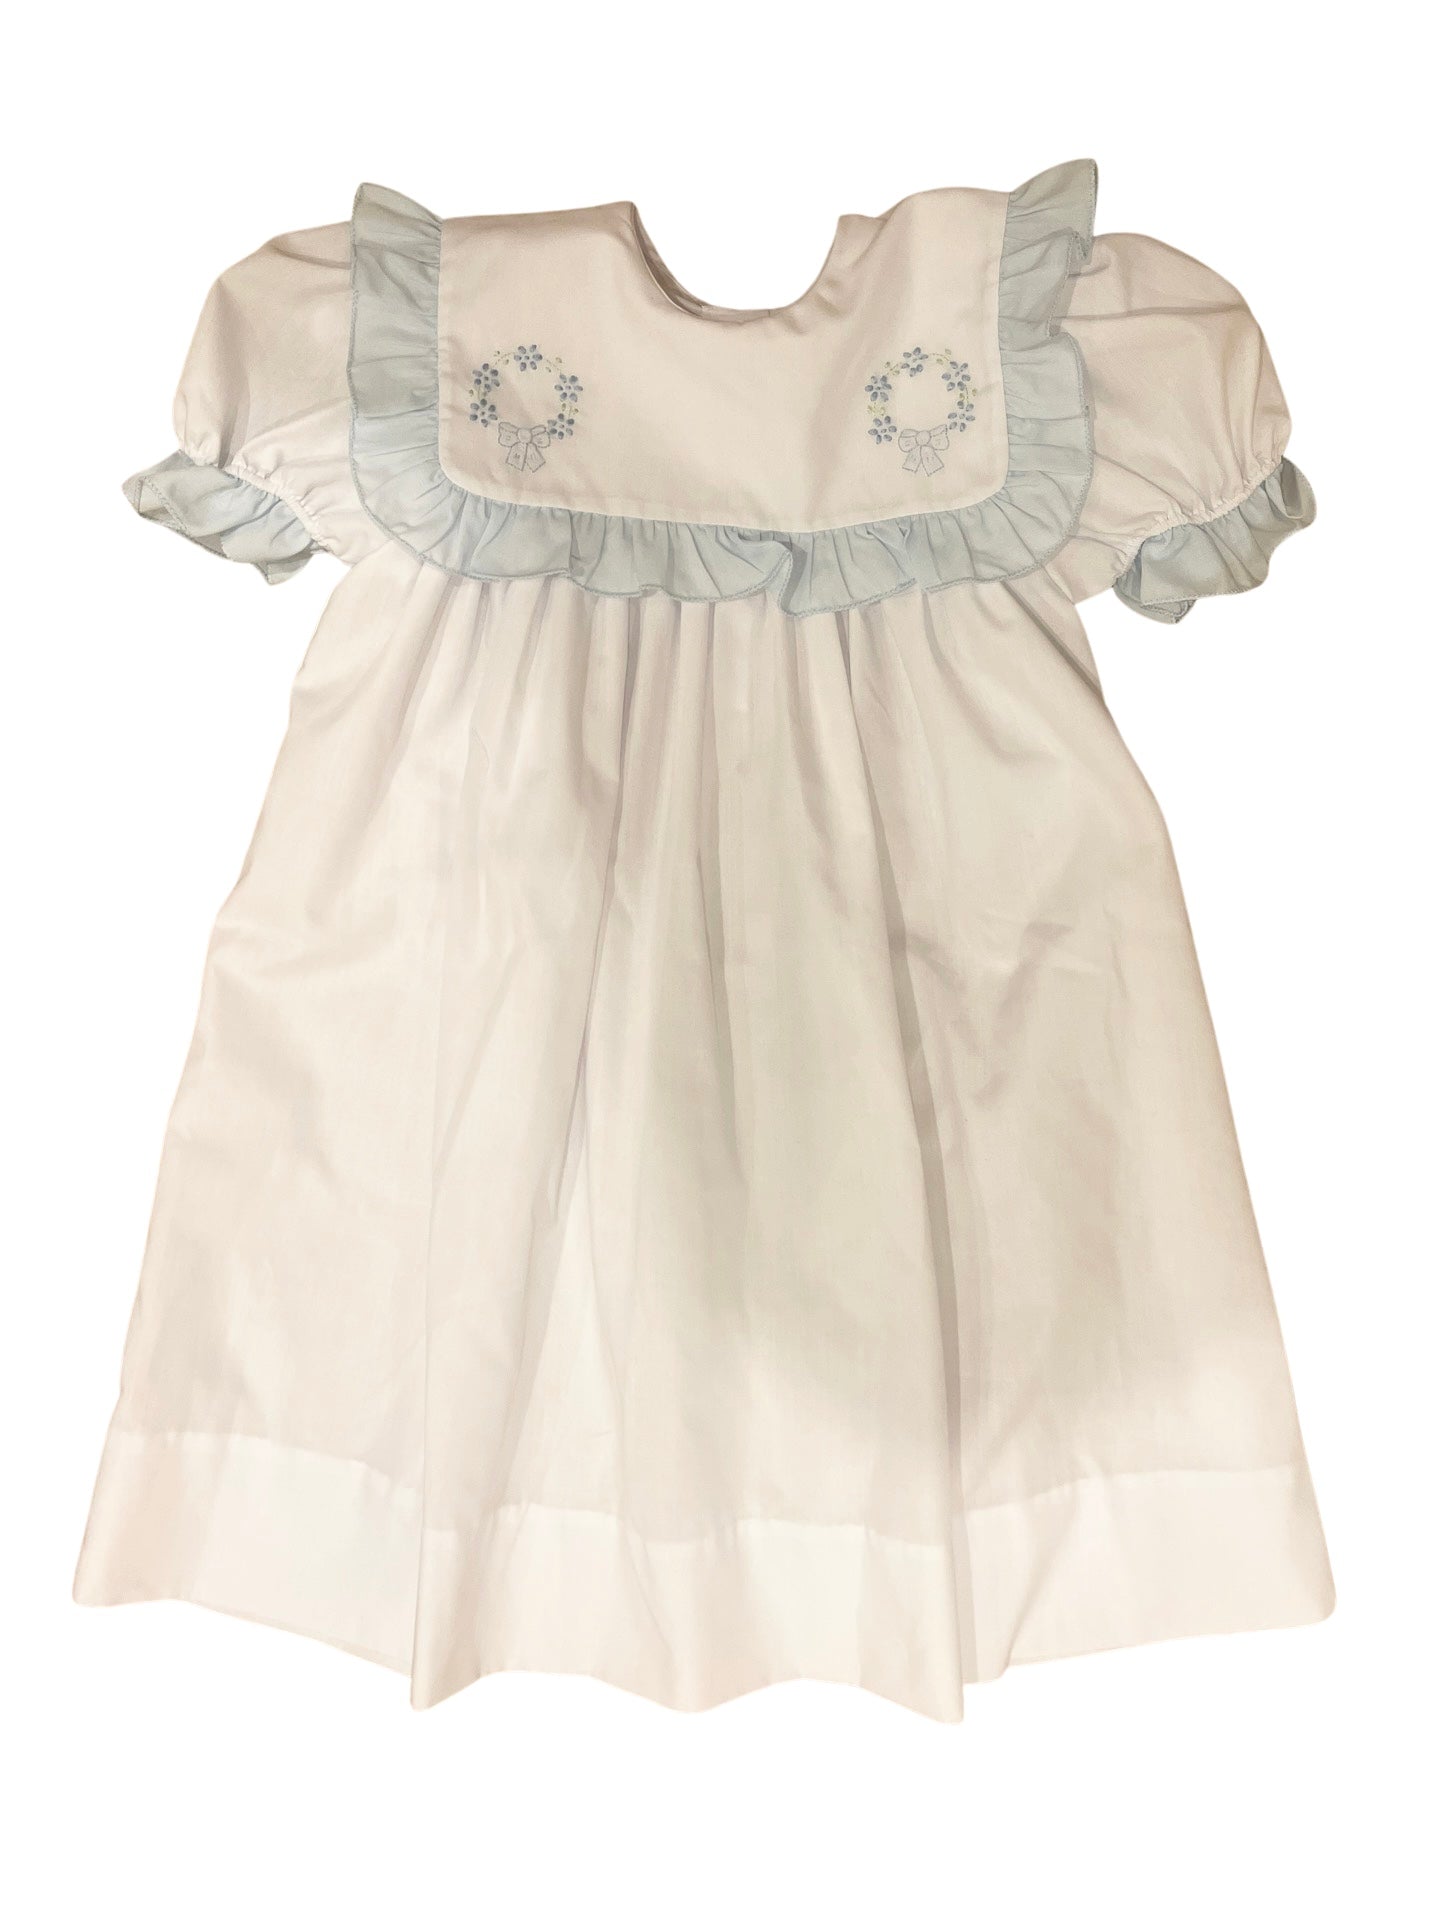 Short Sleeve Dress, Ruffle Bib with Embroidered Flowers